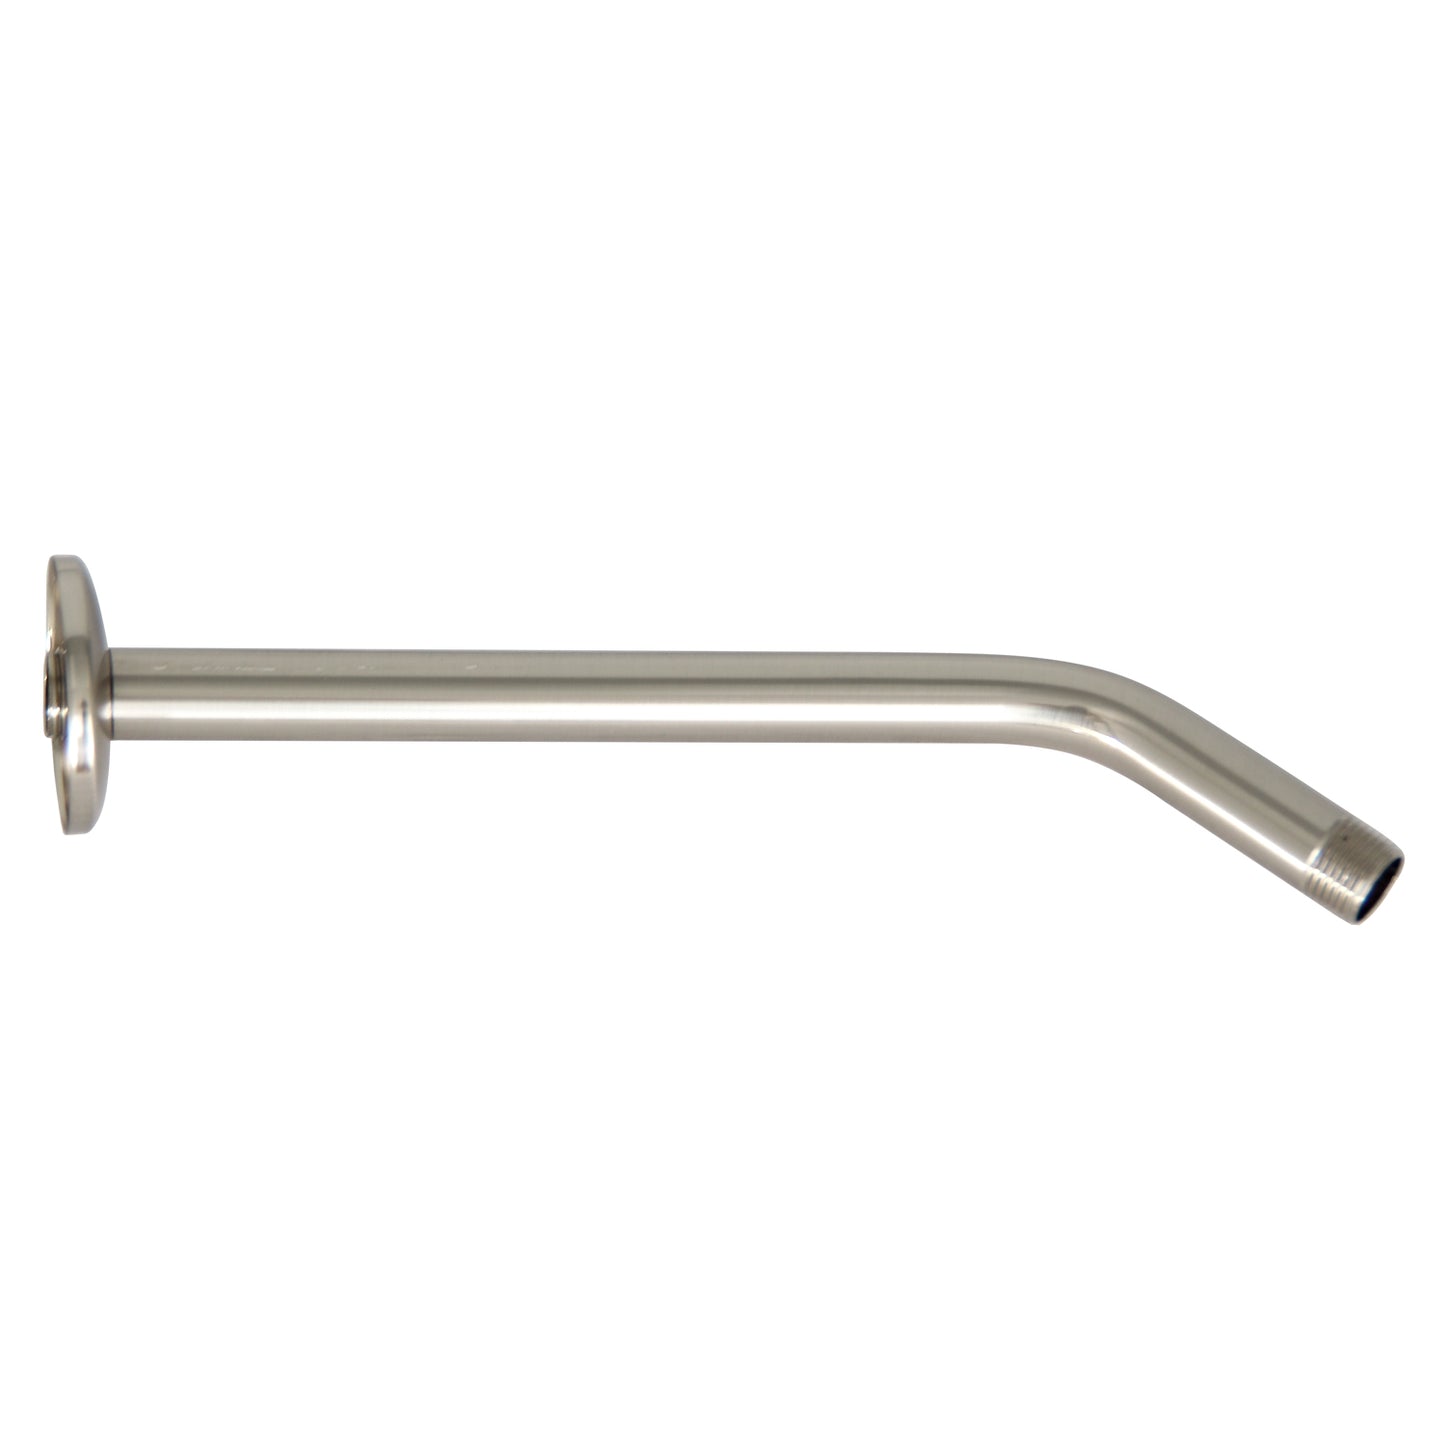 12" Standard Angled Shower Head Arm with Flange Brushed Nickel